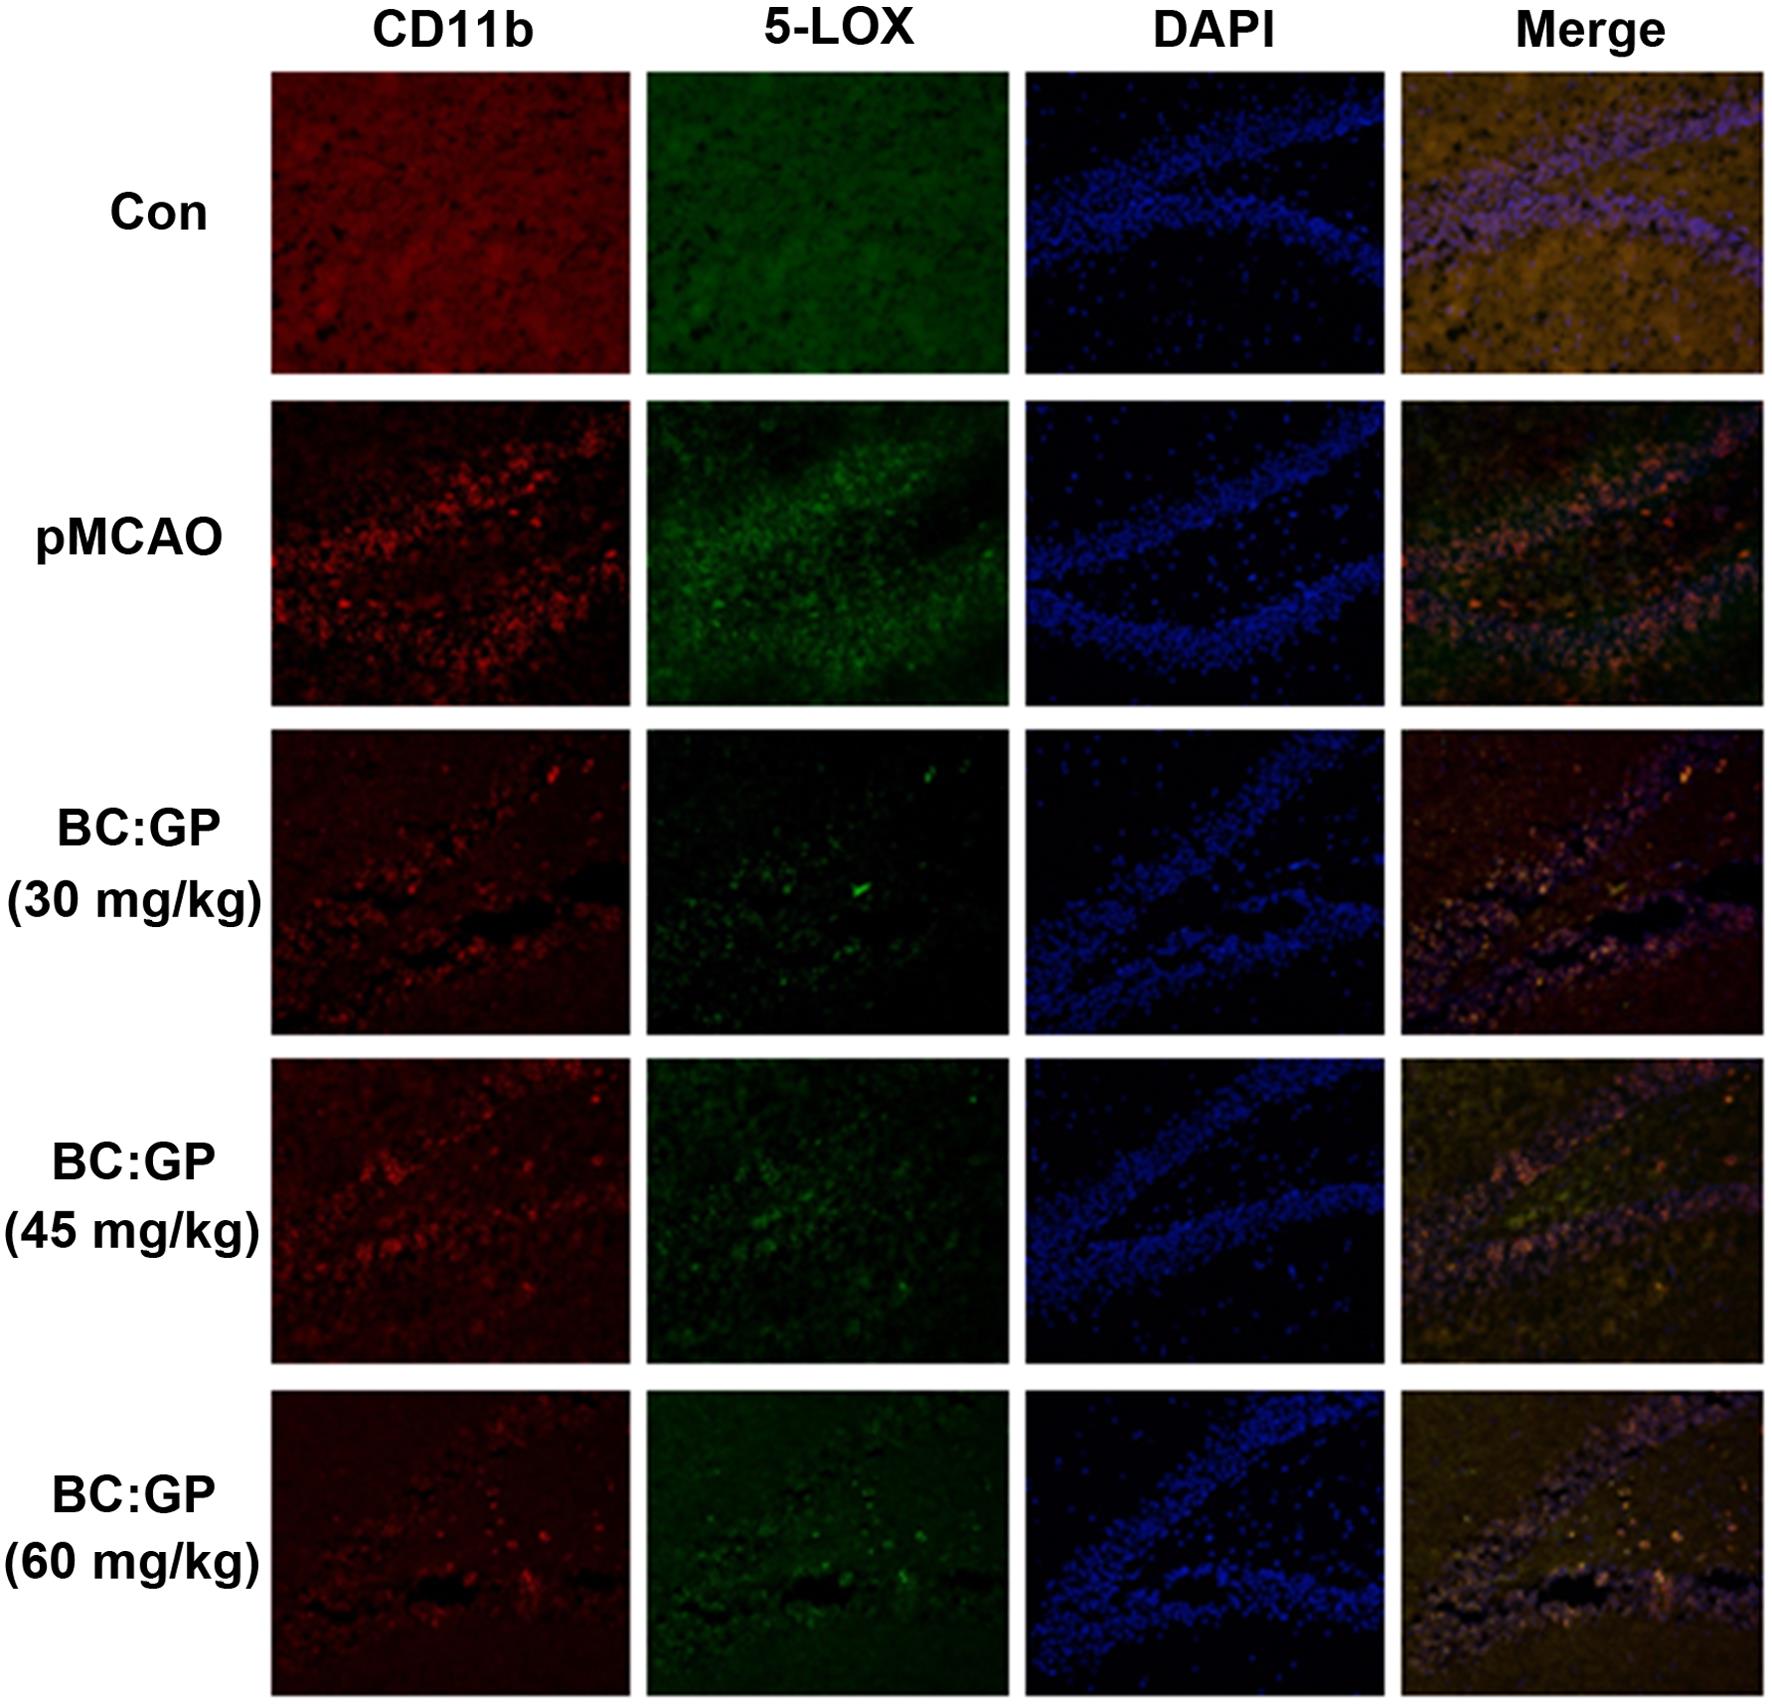 Effect of the BC/GP combination (7:3) on microglia and 5-LOX expression in the brain tissue of pMCAO rats (28 d).